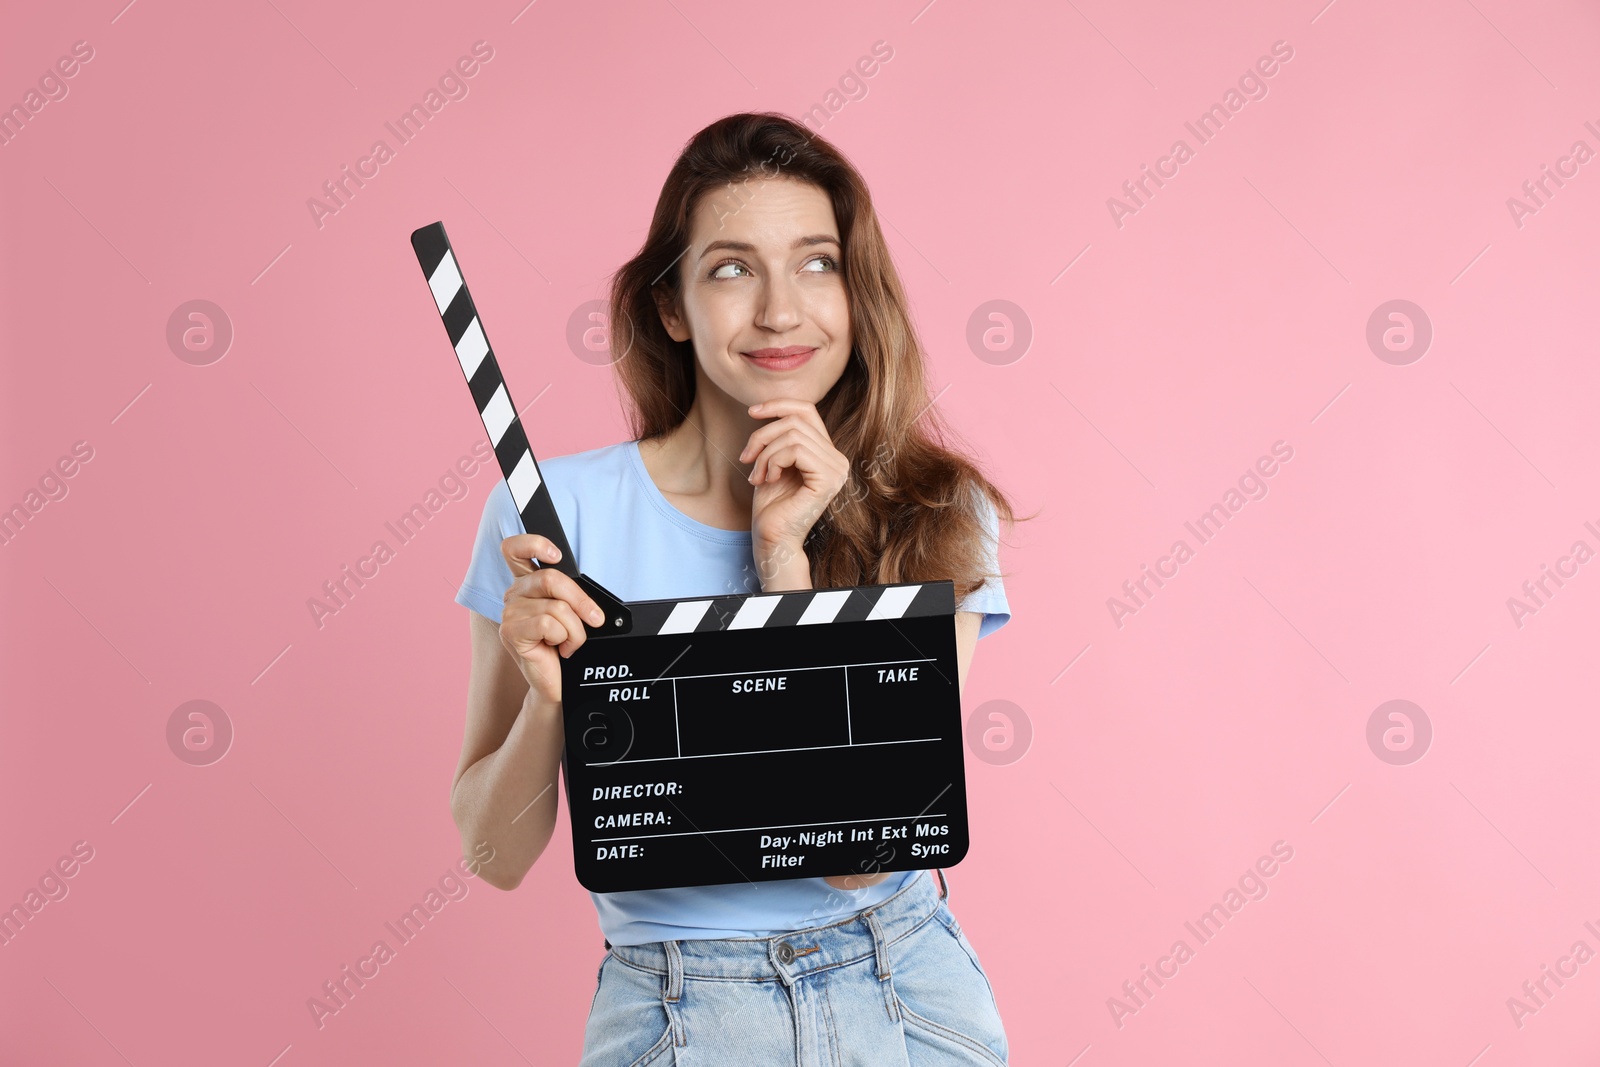 Photo of Making movie. Thoughtful woman with clapperboard on pink background